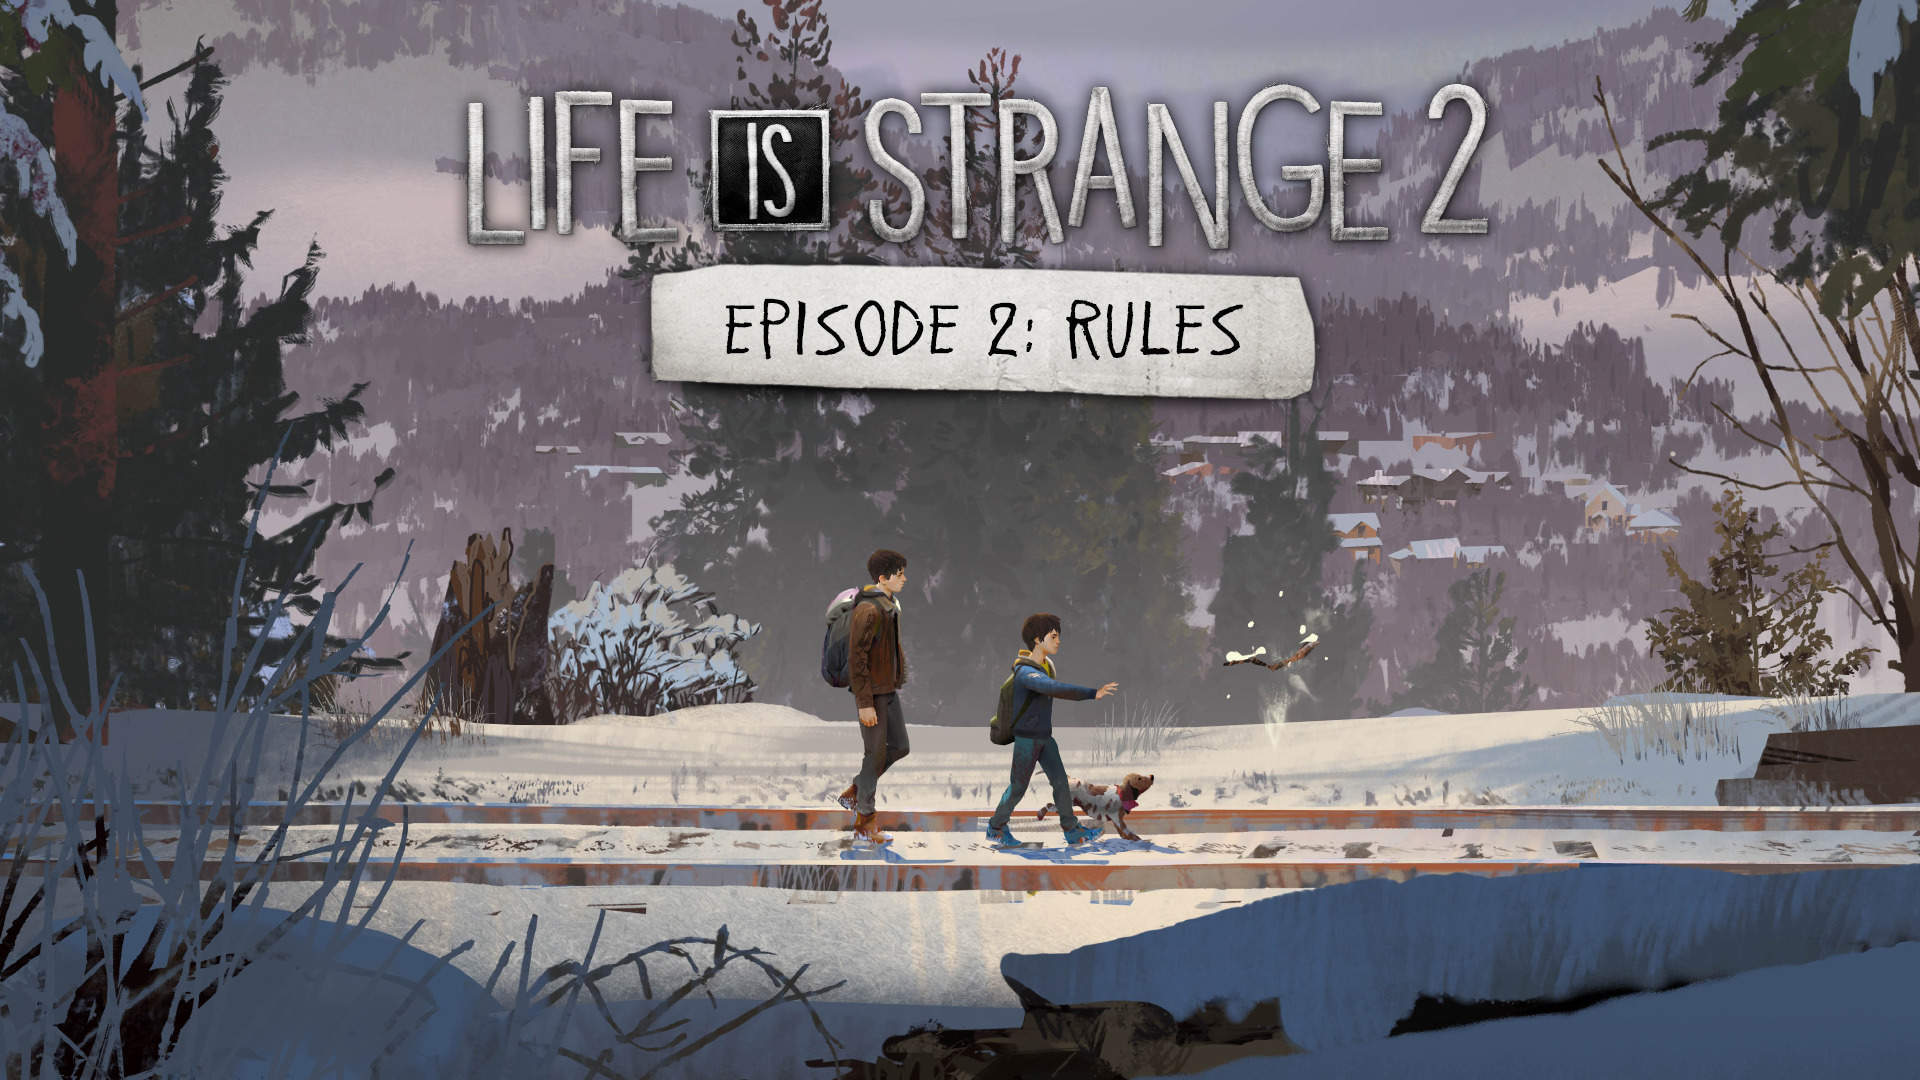 Life is strange 2 Episode 2 Download for Android & IOS